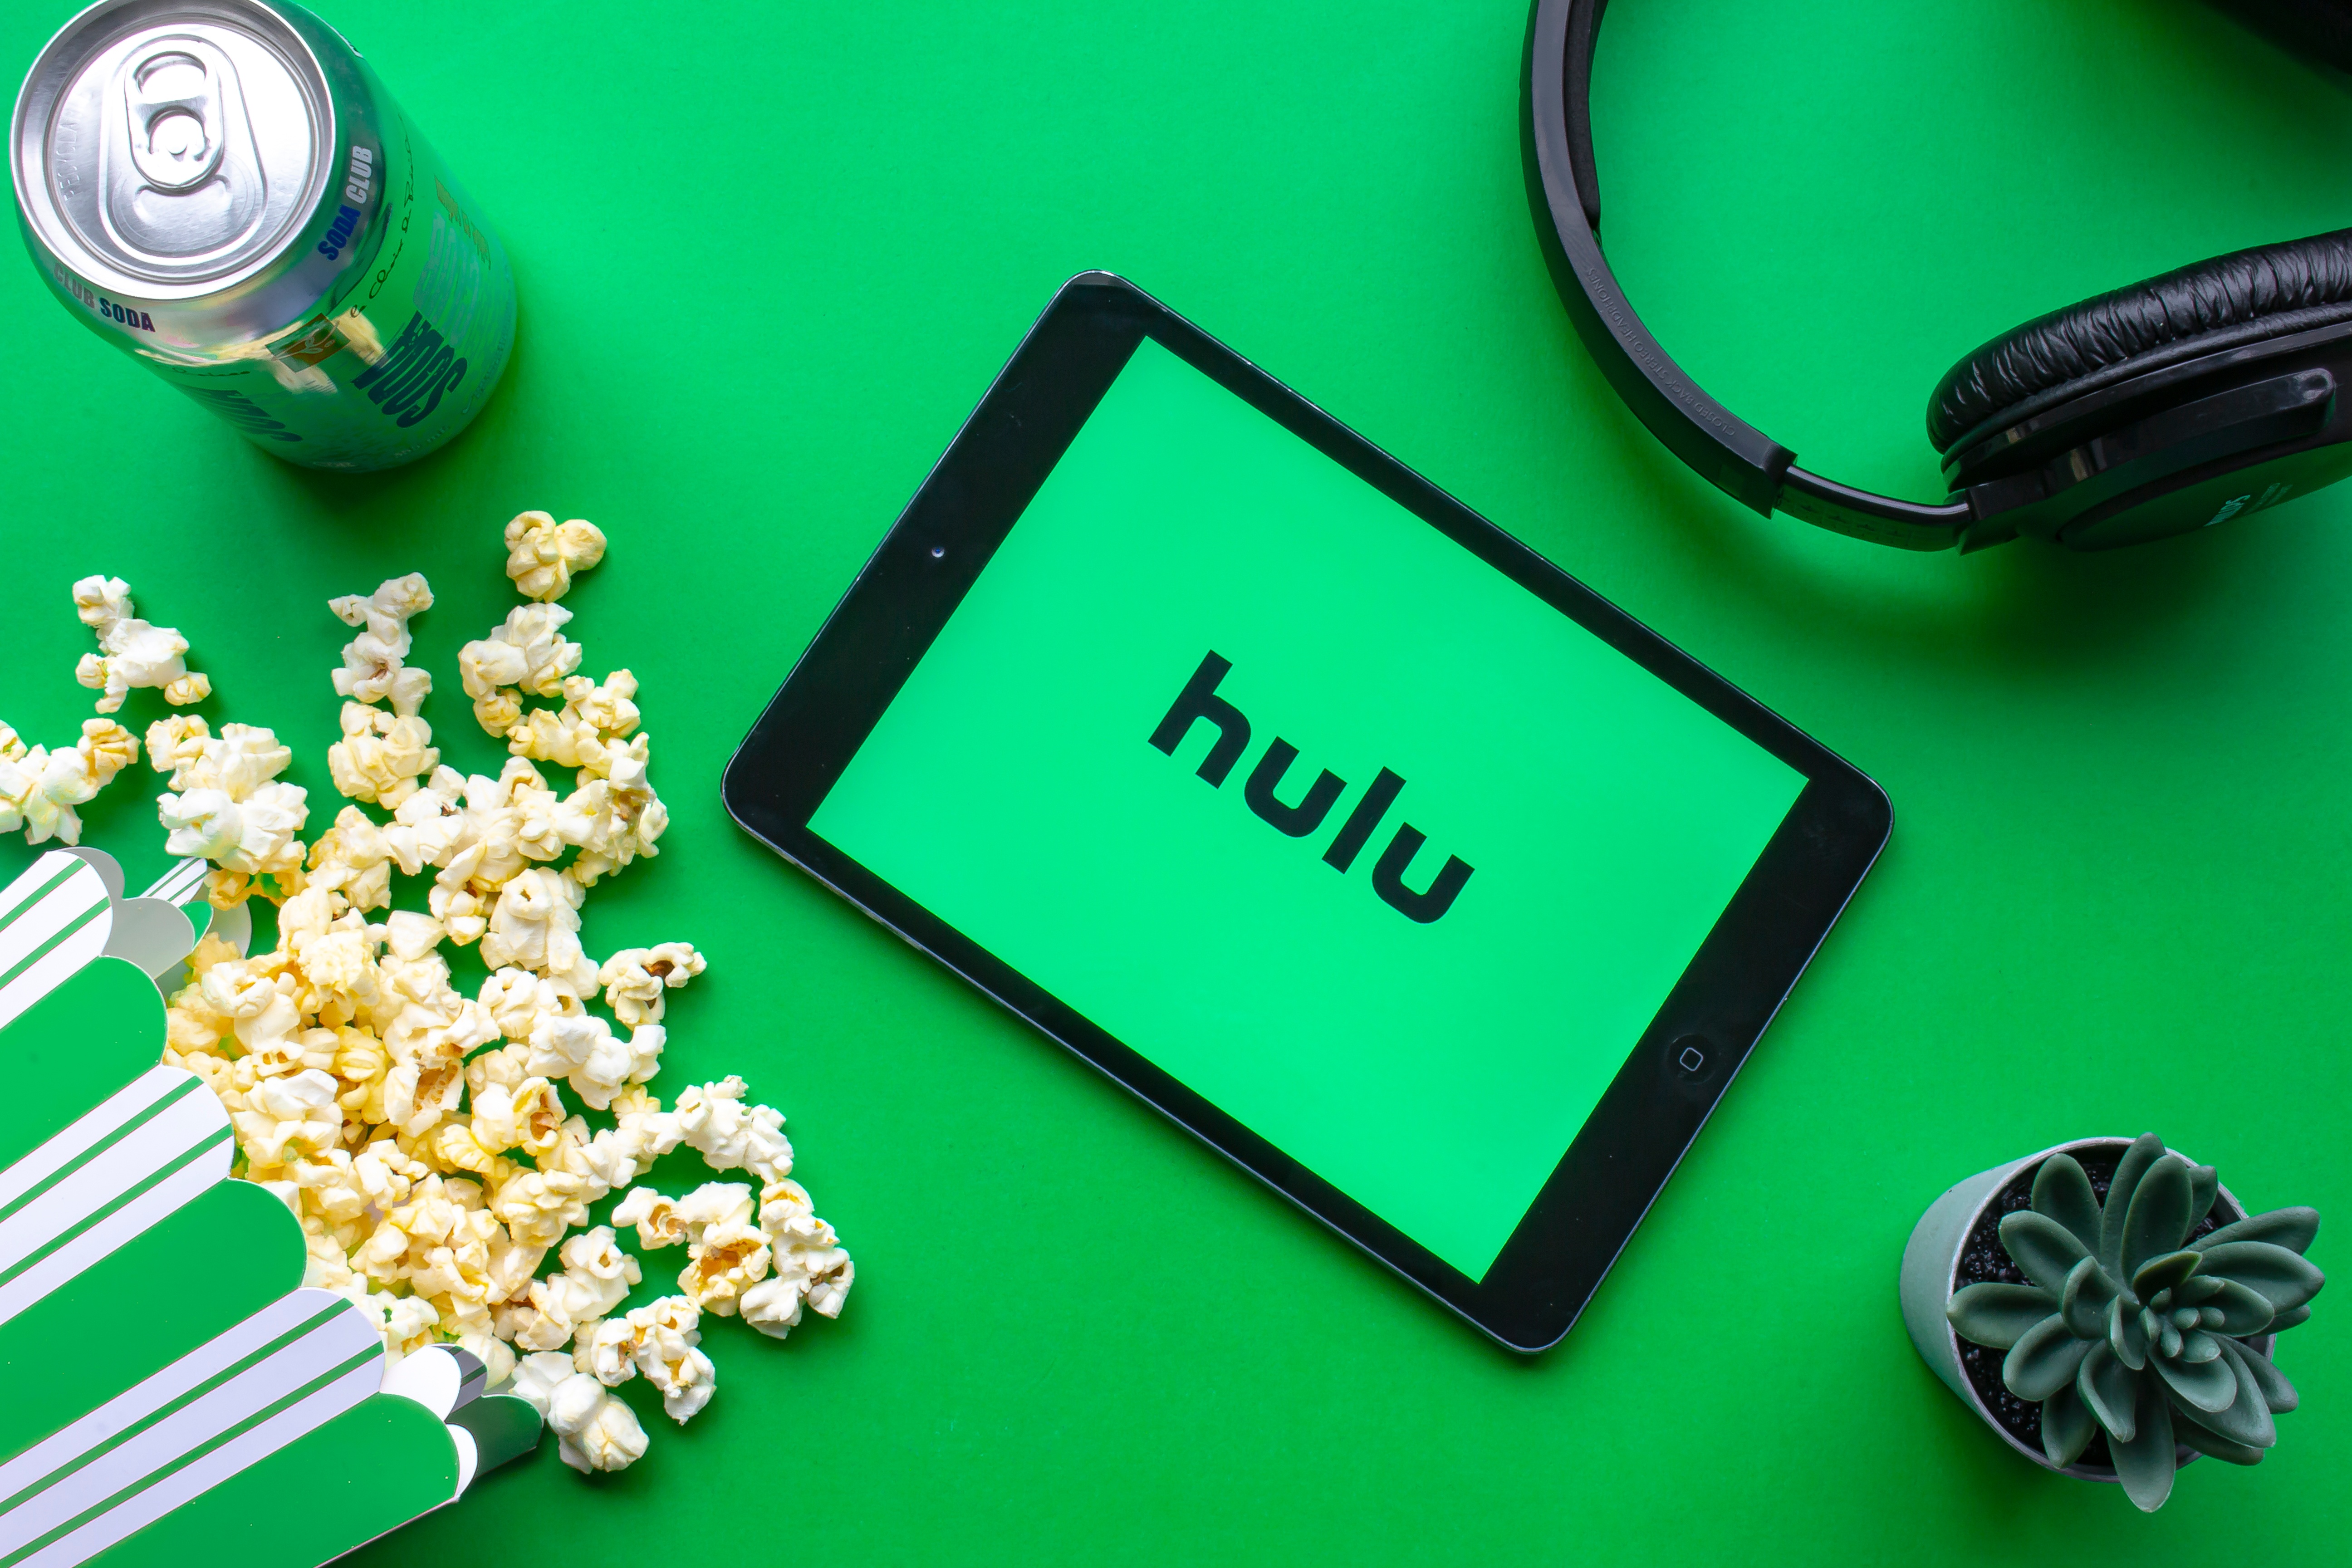 Hulu Introduces Student Discount: Ad-Supported Hulu for $1.99 Per Month